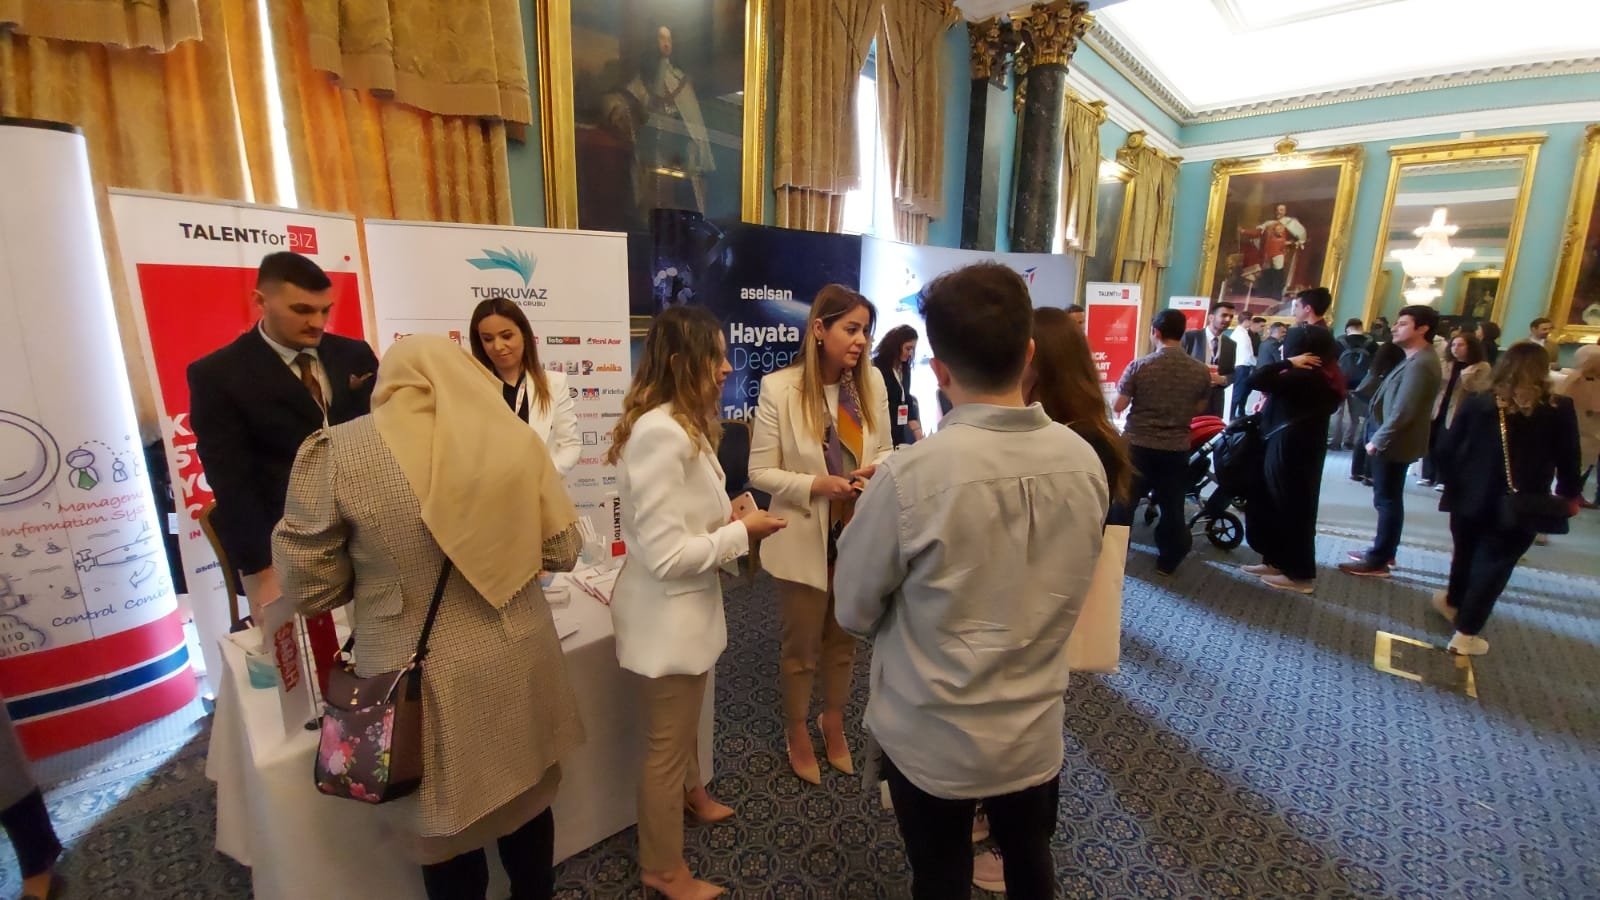 Recruiters and young talent meet at the TalentforBIZ event in London, Britain, Saturday, May 21, 2022. (Sabah Photo)